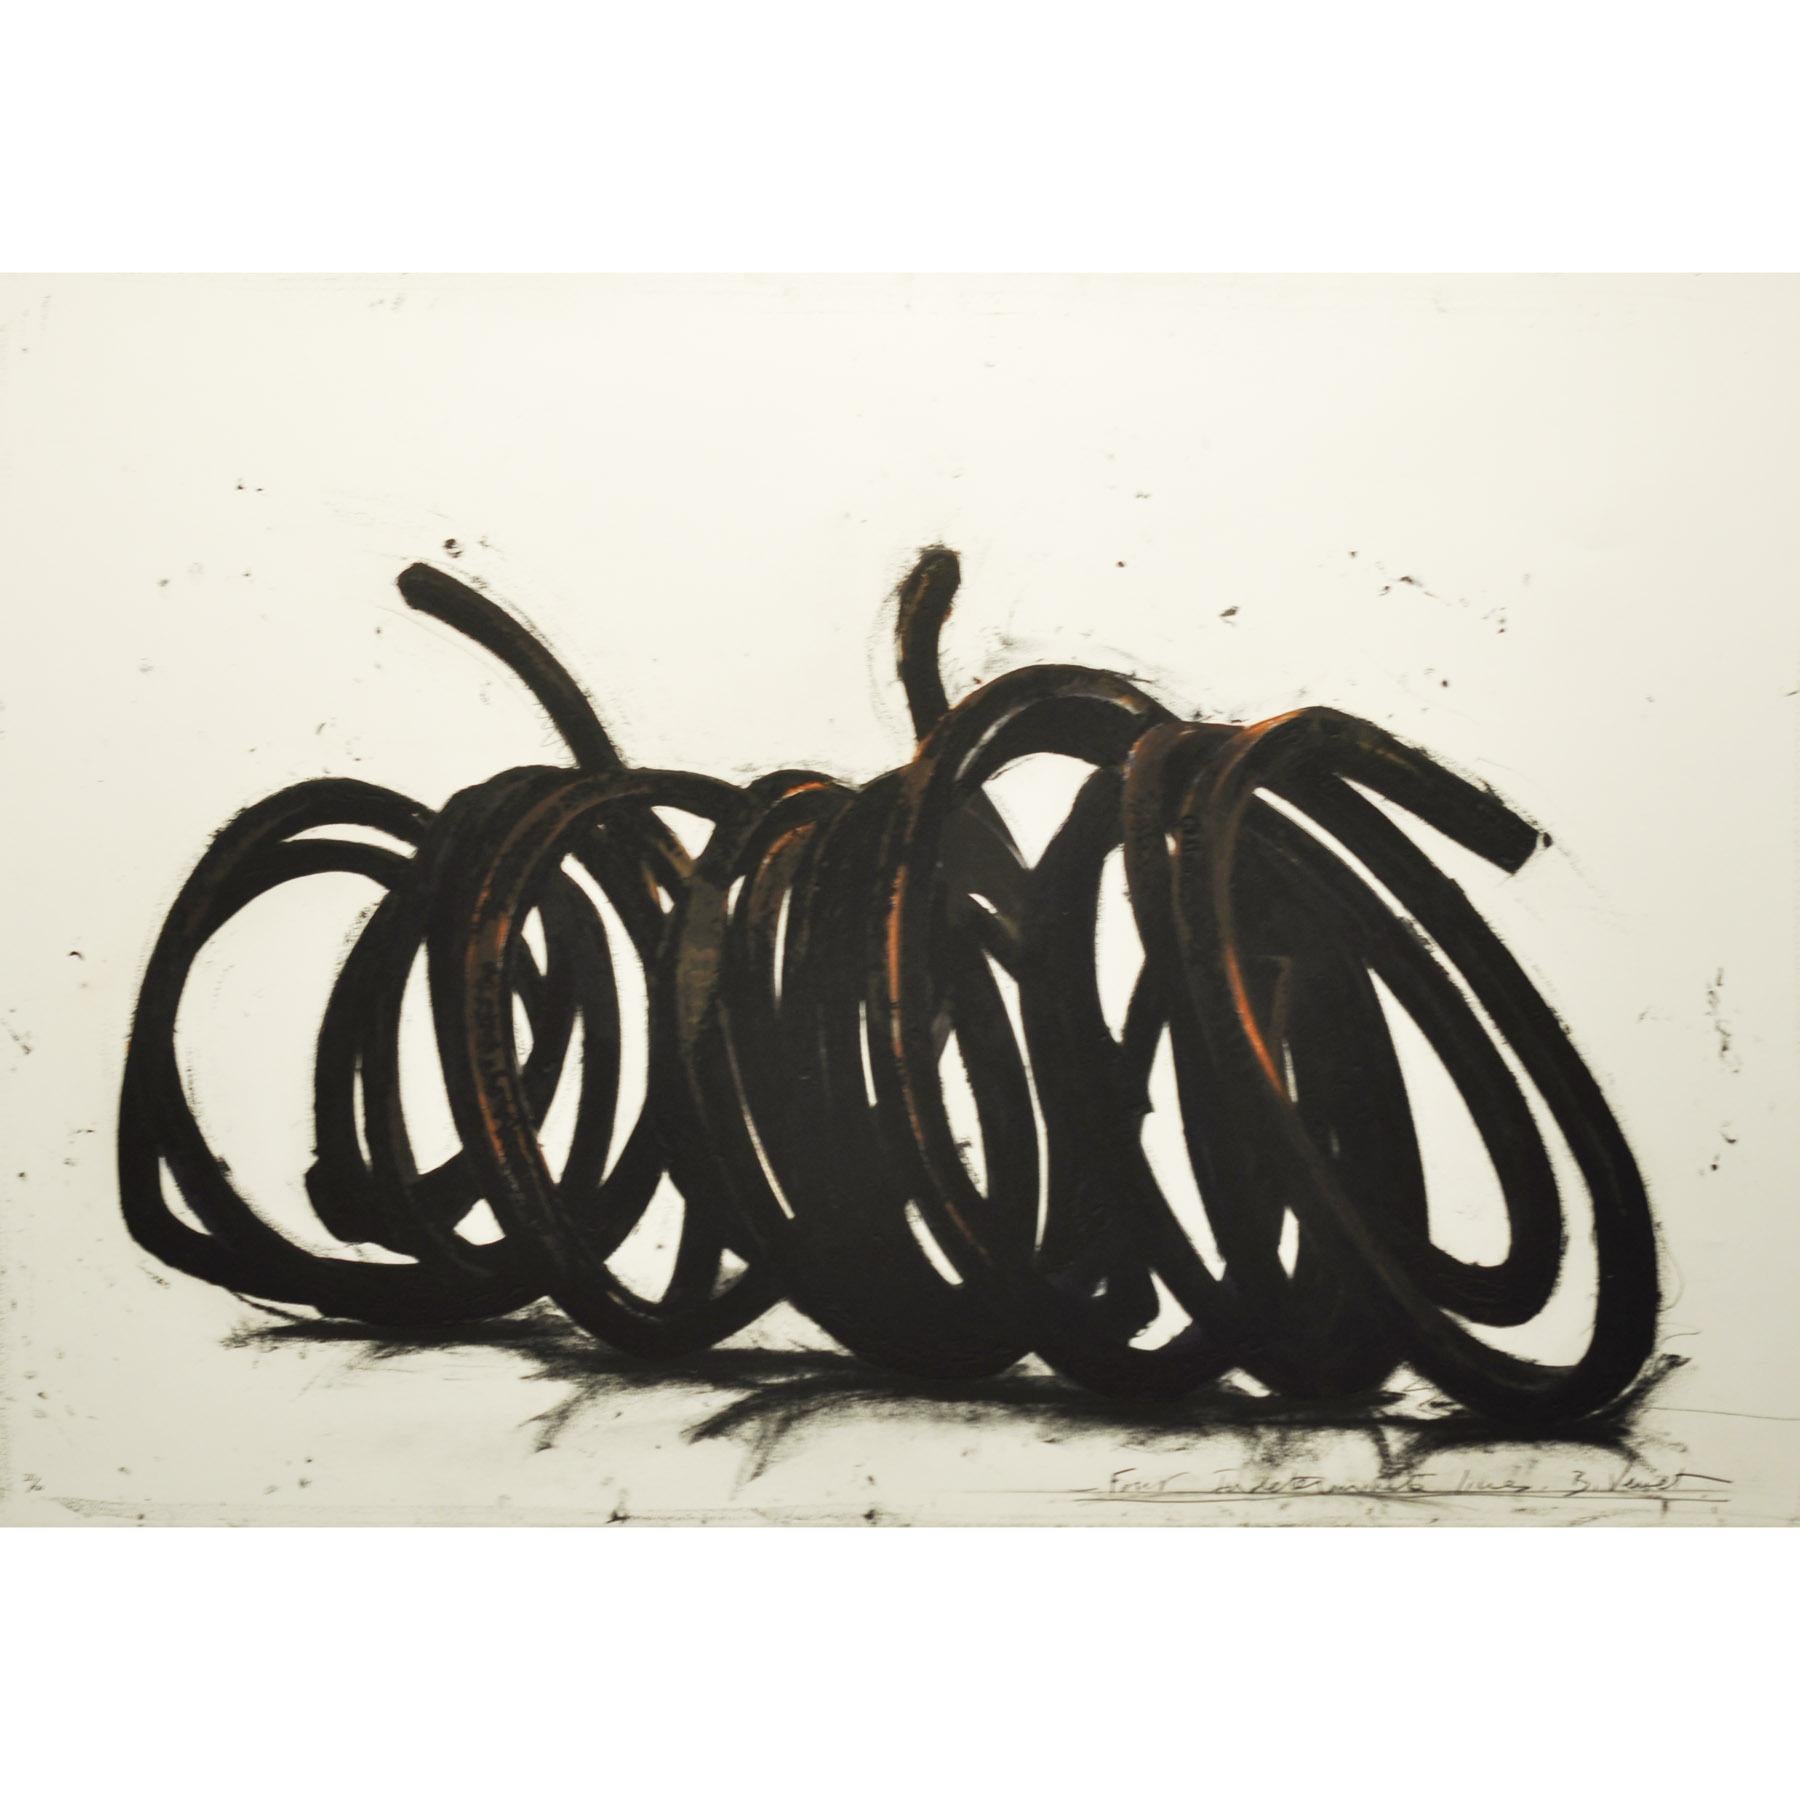 Bernar Venet Figurative Print - Four Indeterminate Lines - Contemporary, 21st Century, Etching, Black and White